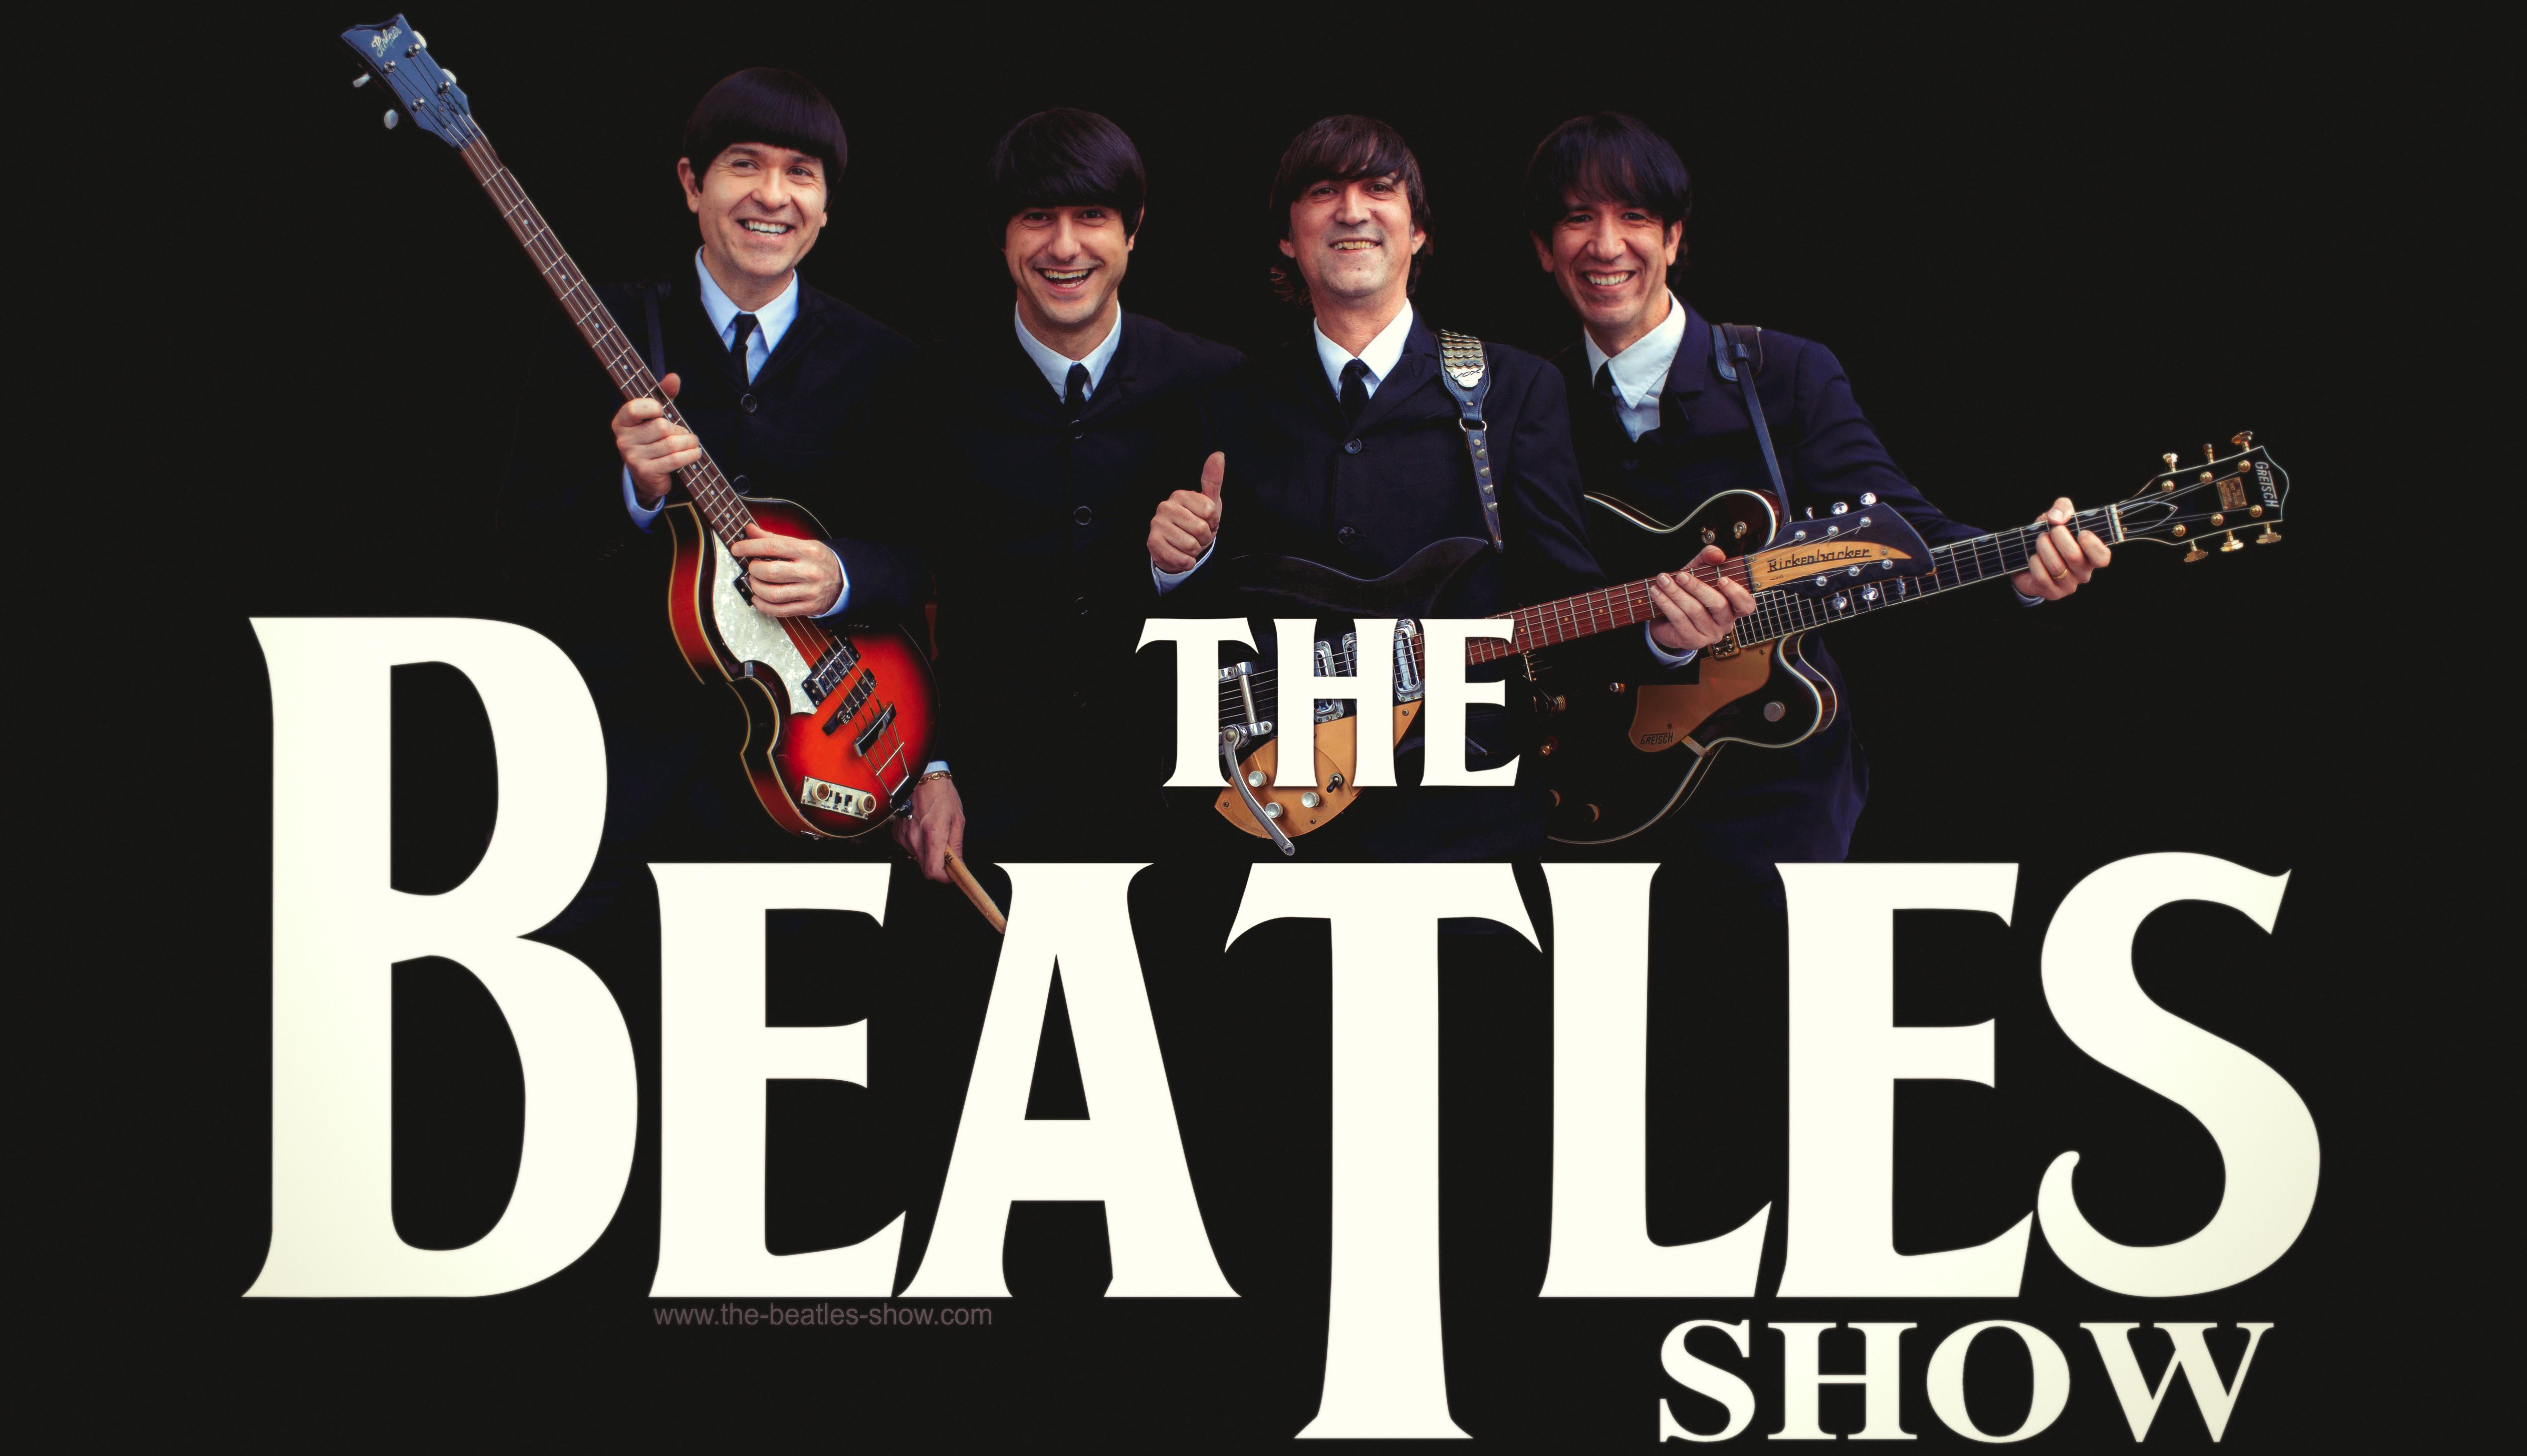 The Beatles Show - Videos